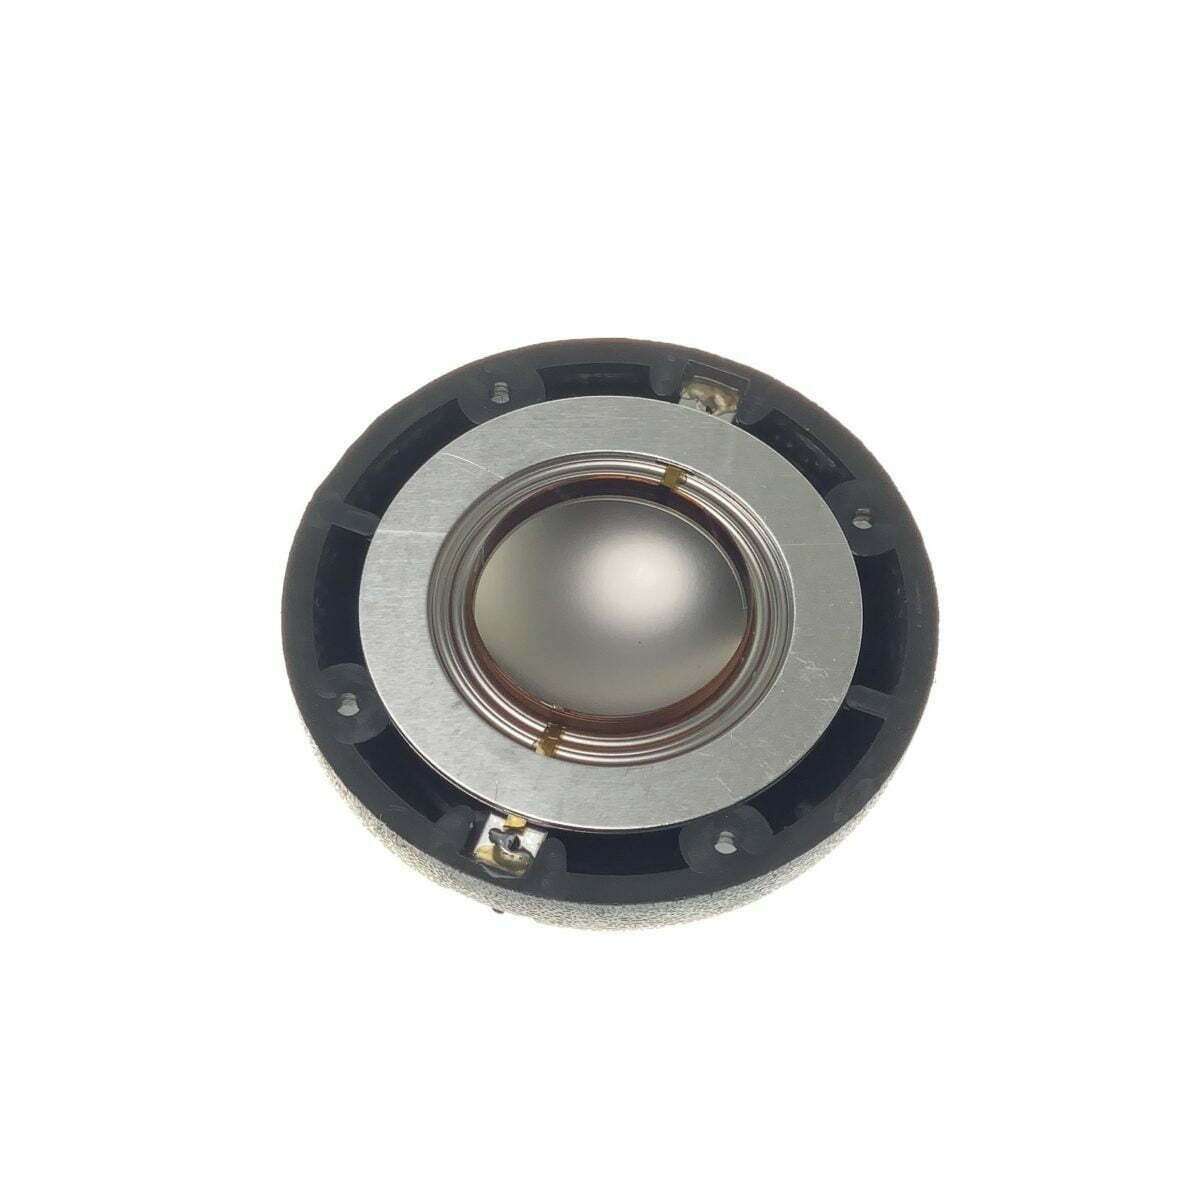 Samson CDR34 Replacement Diaphragm on a white background